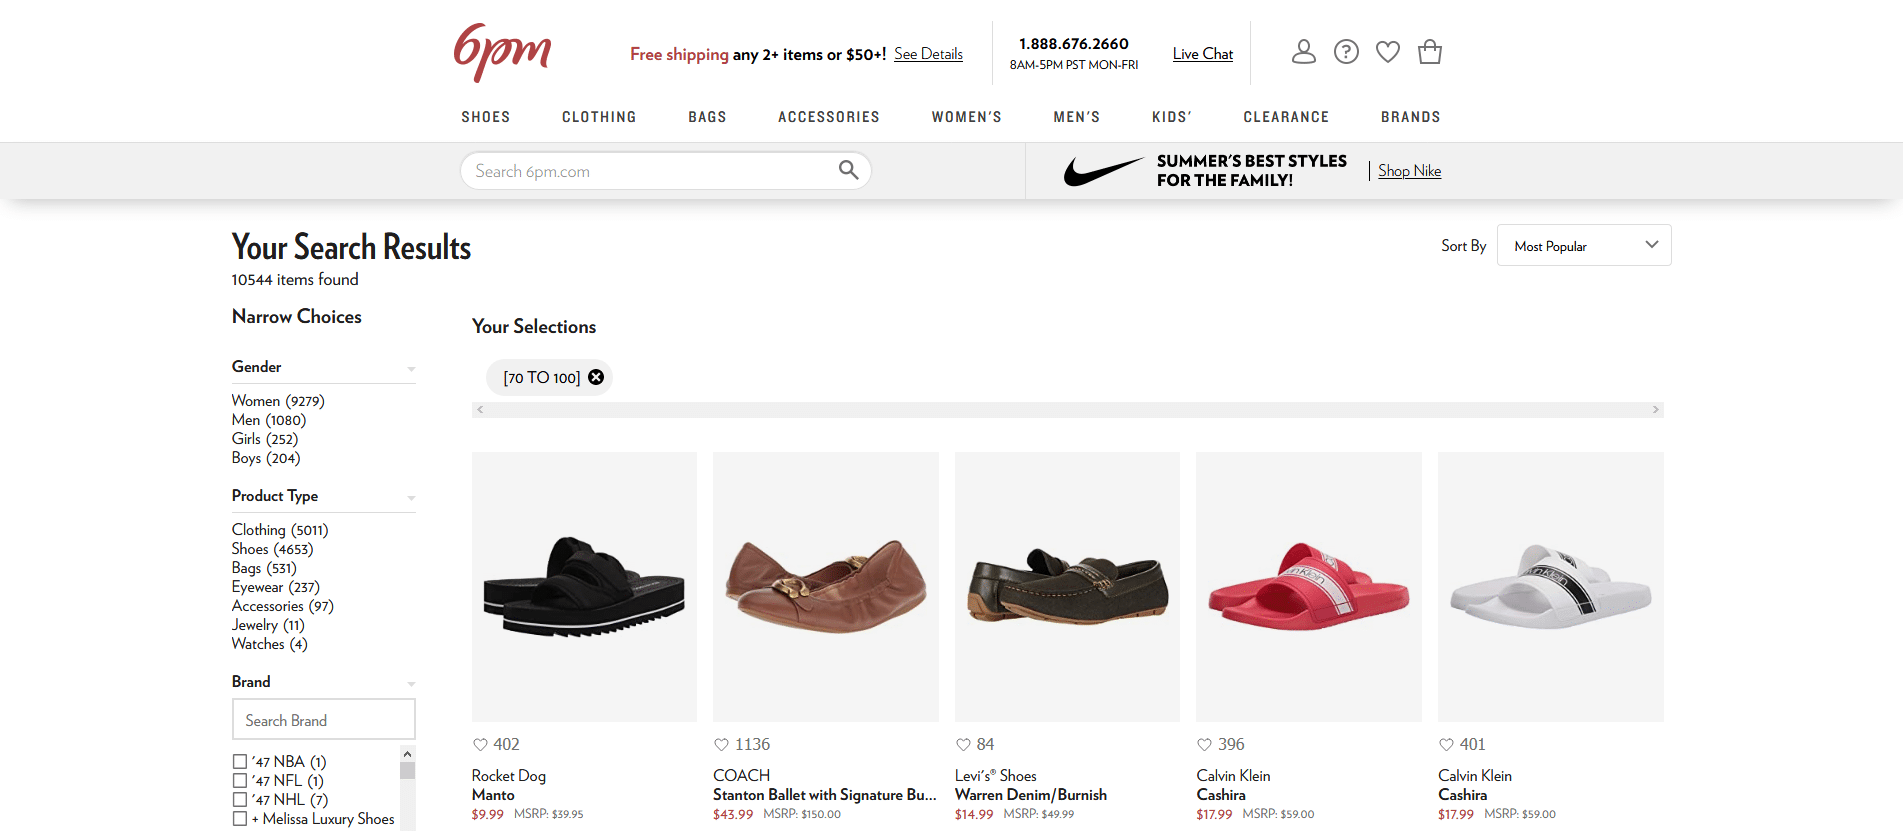 6pm discount shoes